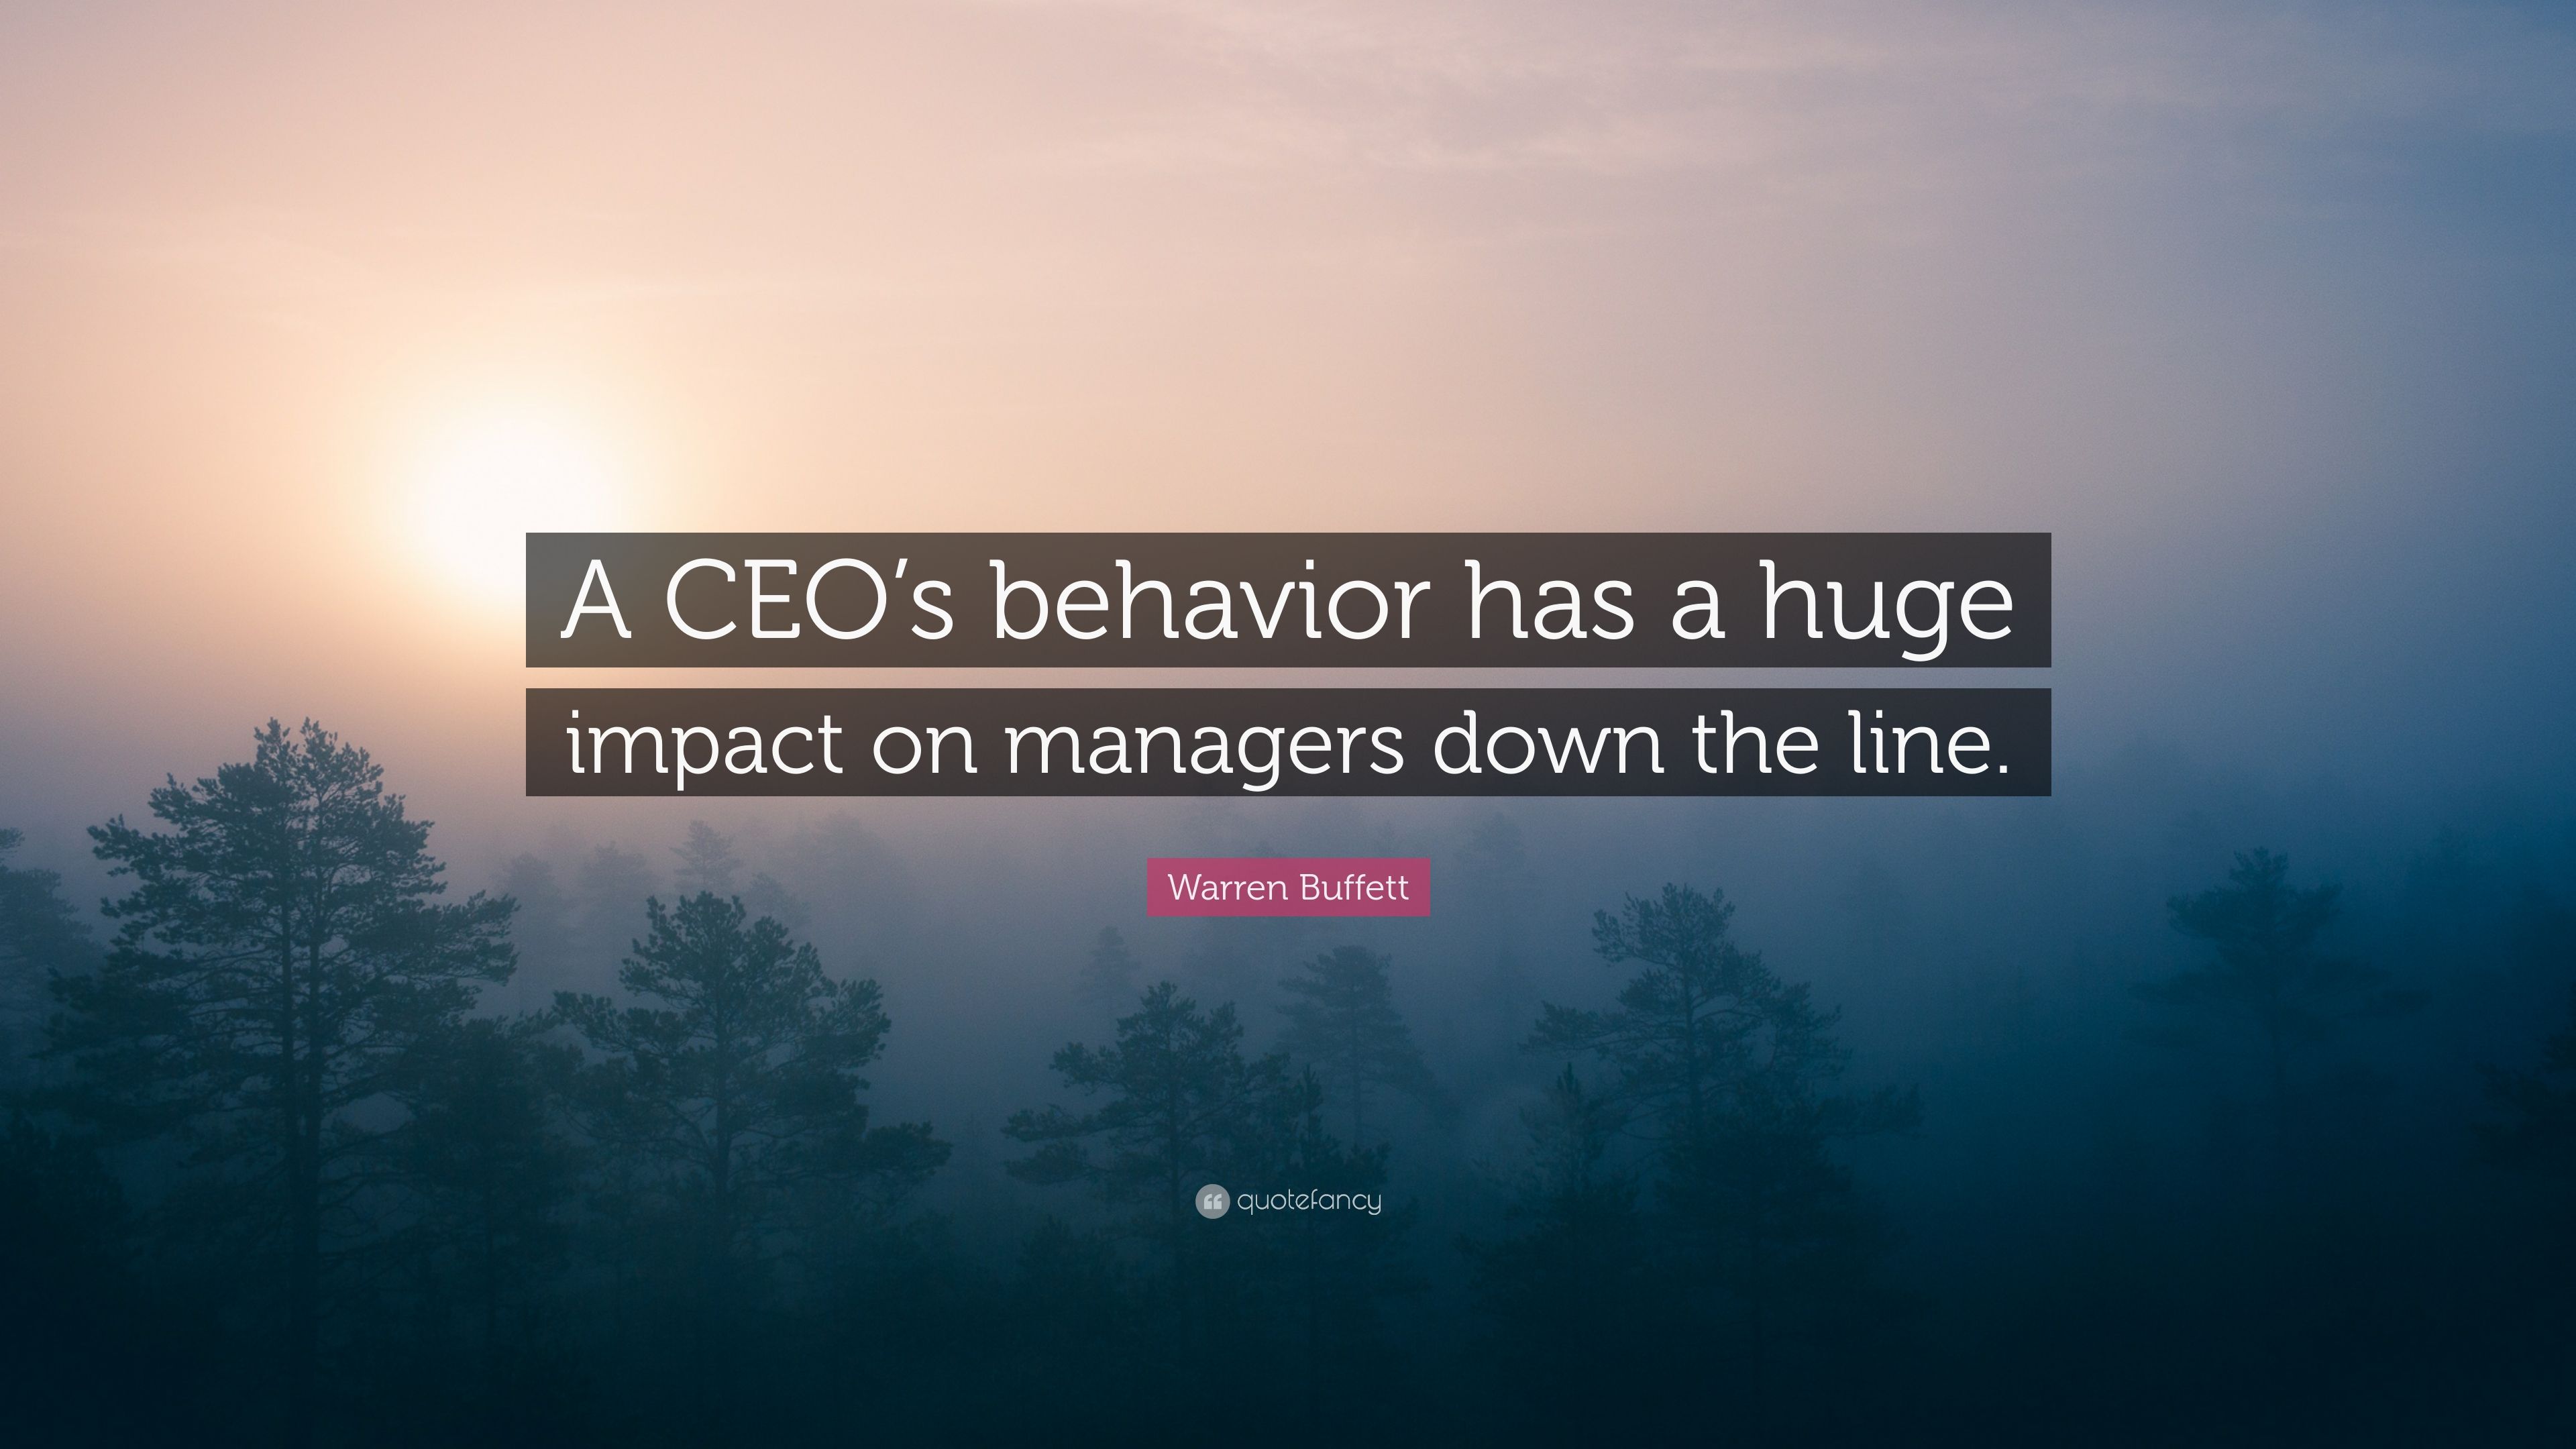 Warren Buffett Quote: “A CEO's behavior has a huge impact on managers down the line.” (7 wallpaper)